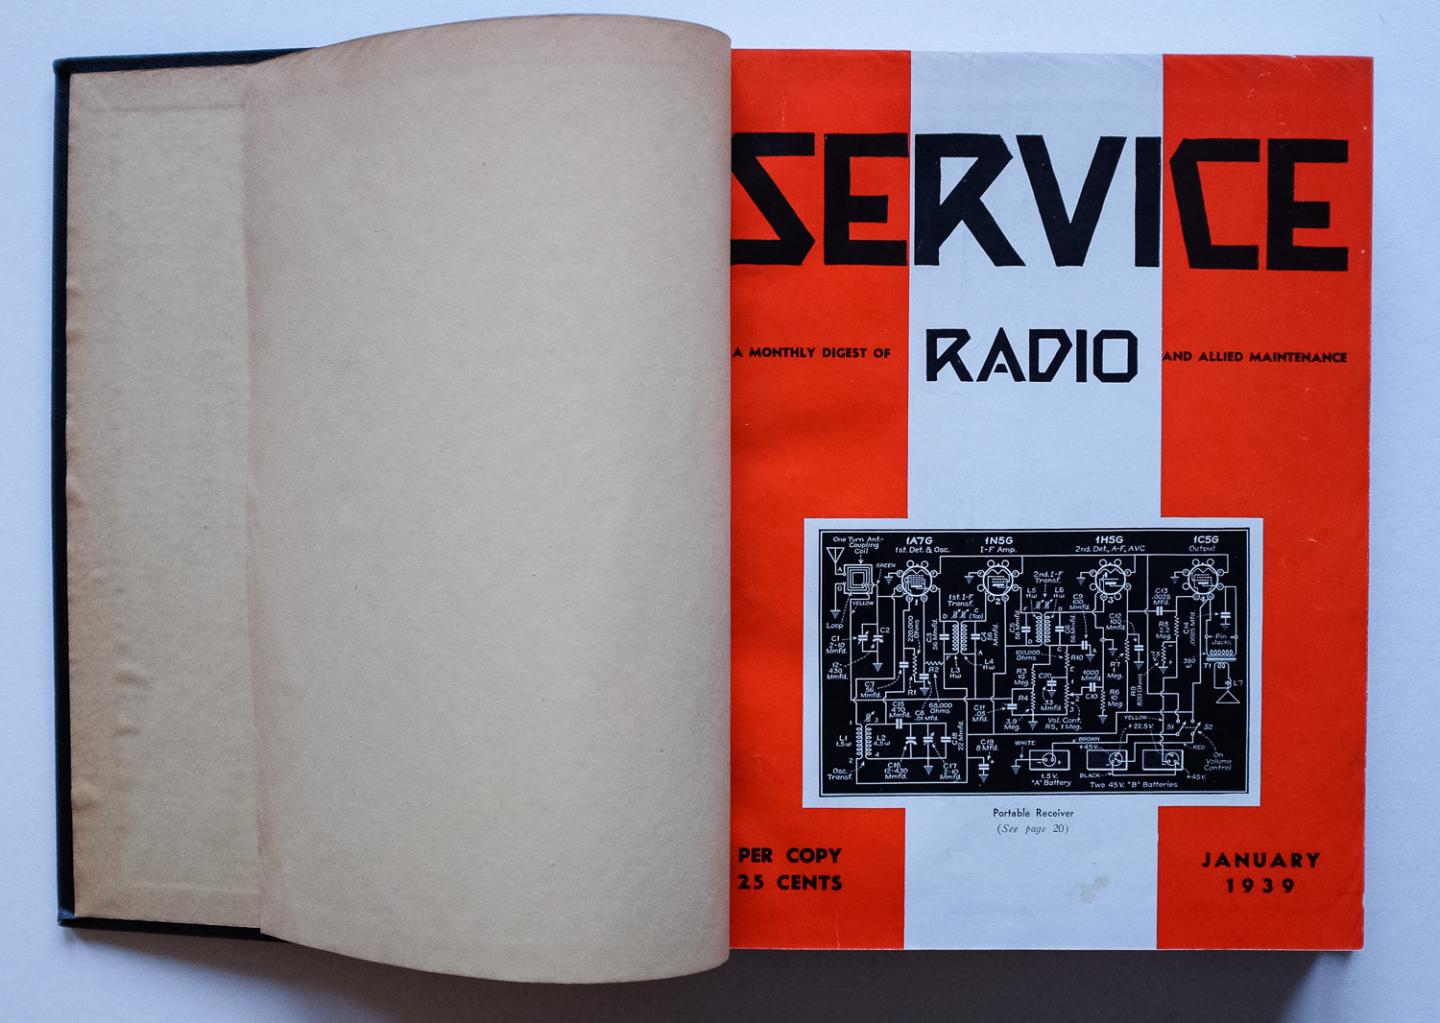 Herzog, Robert S. - Service : a monthly digest of radio and allied maintenance